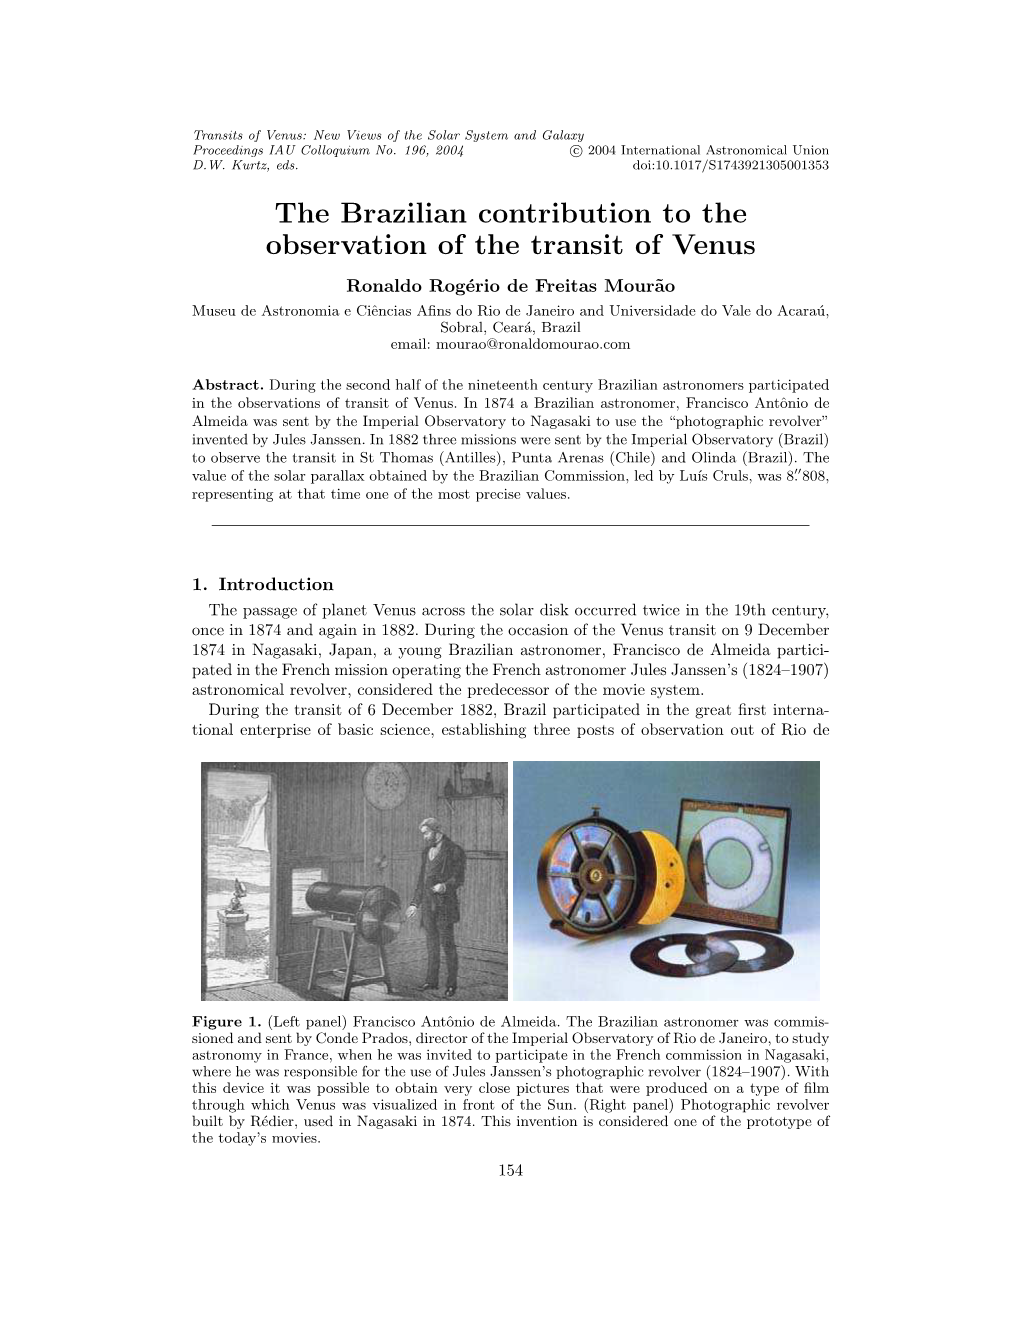 The Brazilian Contribution to the Observation of the Transit of Venus